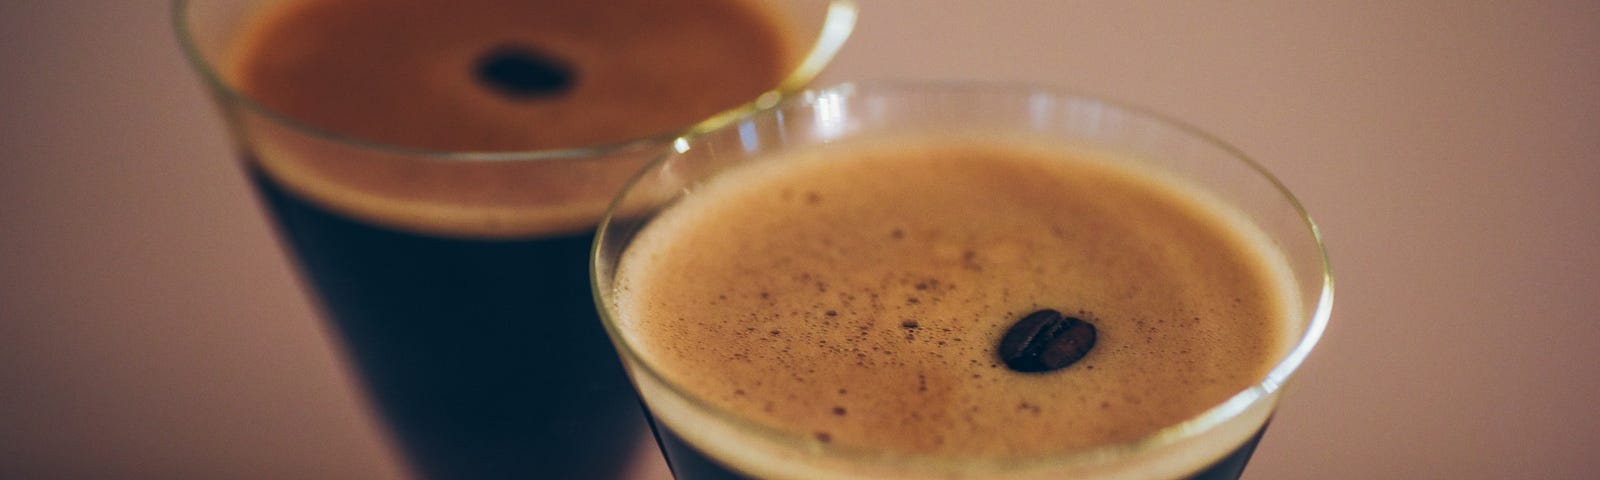 Two conical Martini glasses full of dark brown liquid with a foamy top and a coffee bean in the centre are placed on a counter top